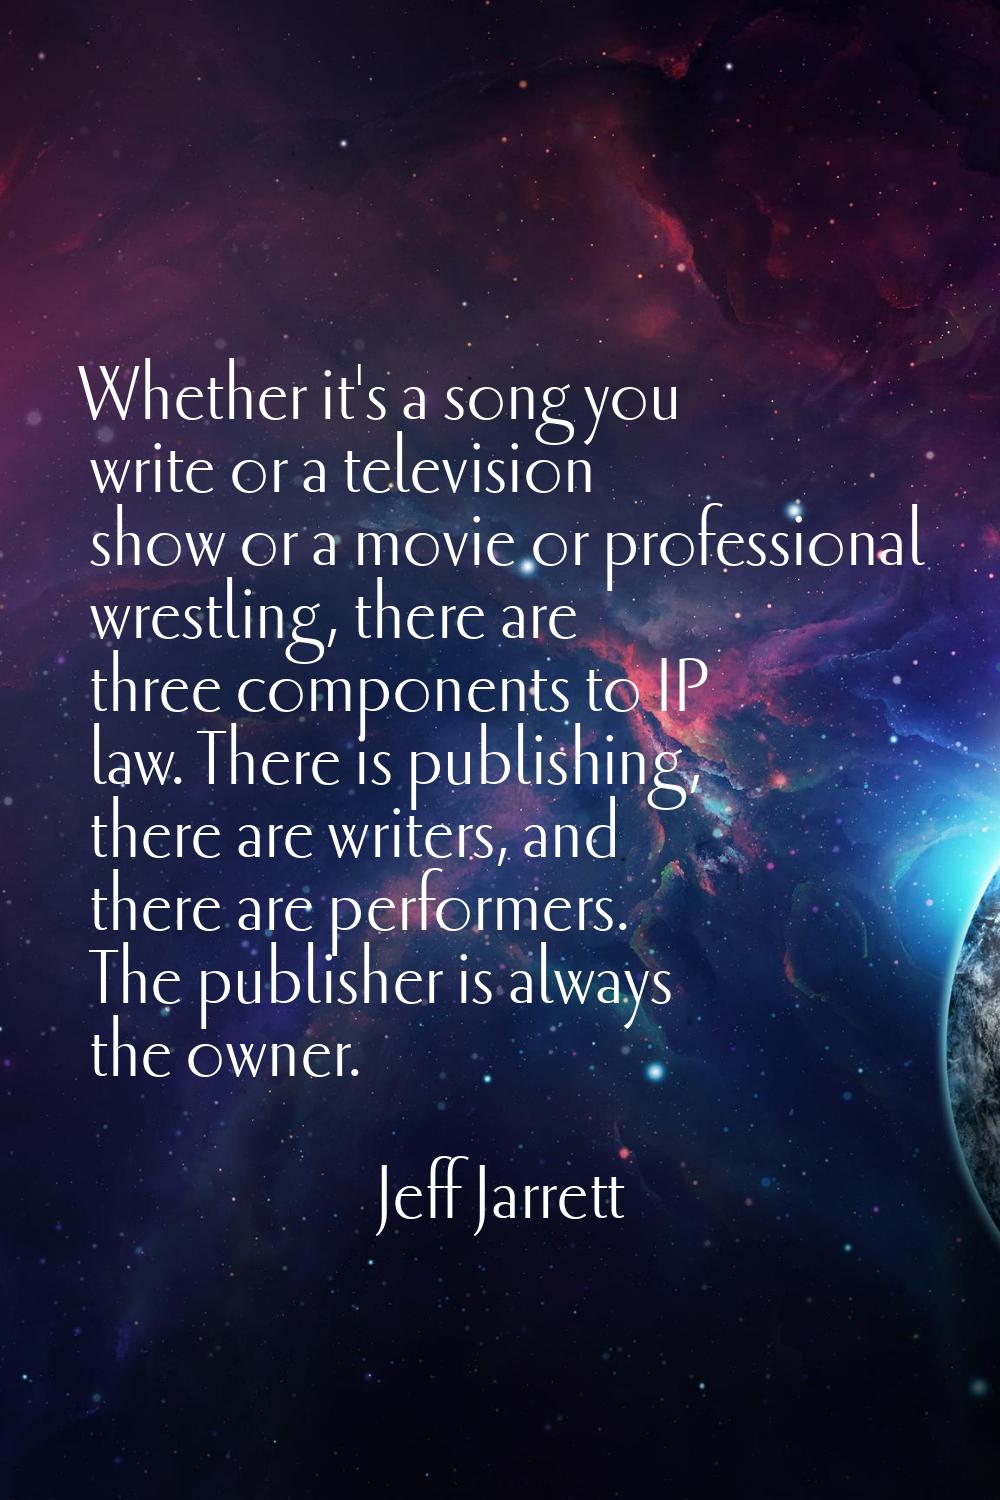 Whether it's a song you write or a television show or a movie or professional wrestling, there are 